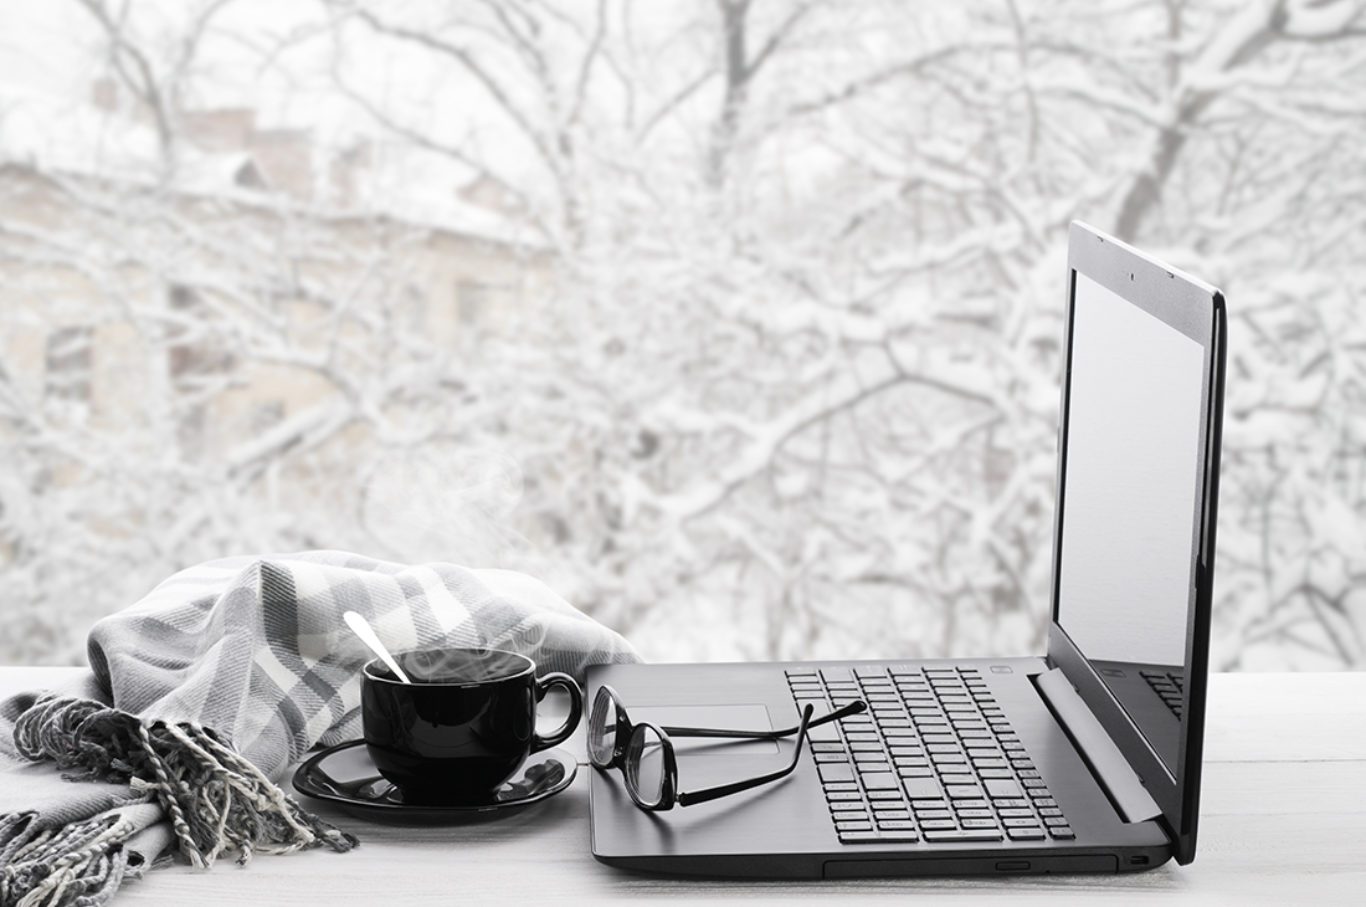 Cozy winter still life: laptop, glasses, cup of hot coffee and warm plaid on windowsill against snow landscape from outside.